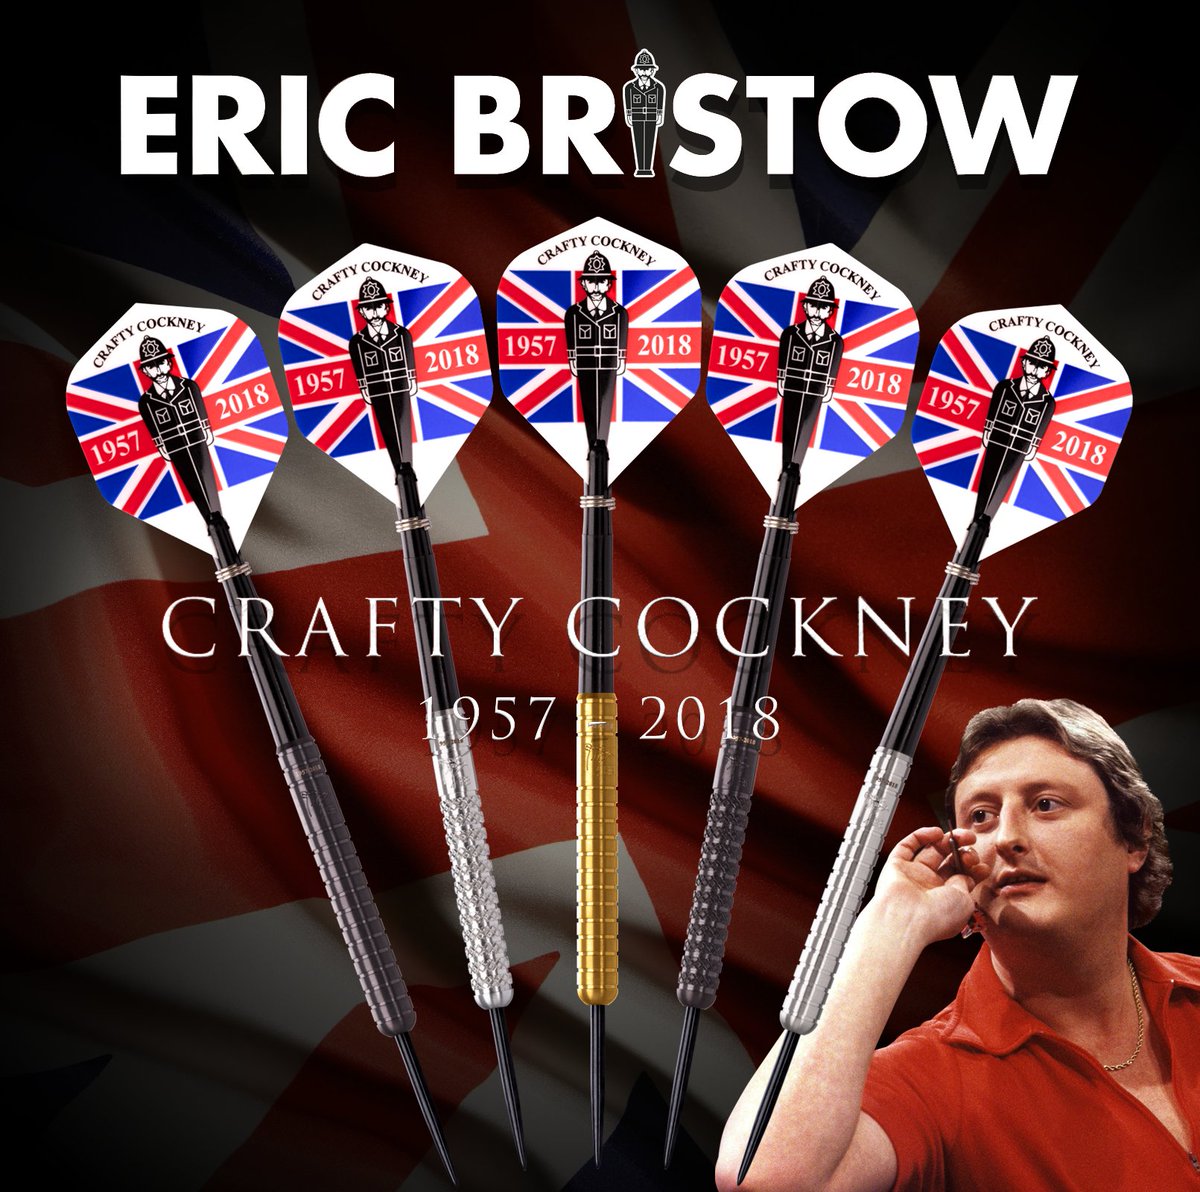 Check out the Bristow Range - 5x Champion of the World🎯 The Eric Bristow range is available here ➡ bit.ly/EricBristow Check out all Legend Darts products including our Wayne Mardle, Lisa Ashton and other pro player ranges at legenddarts.com